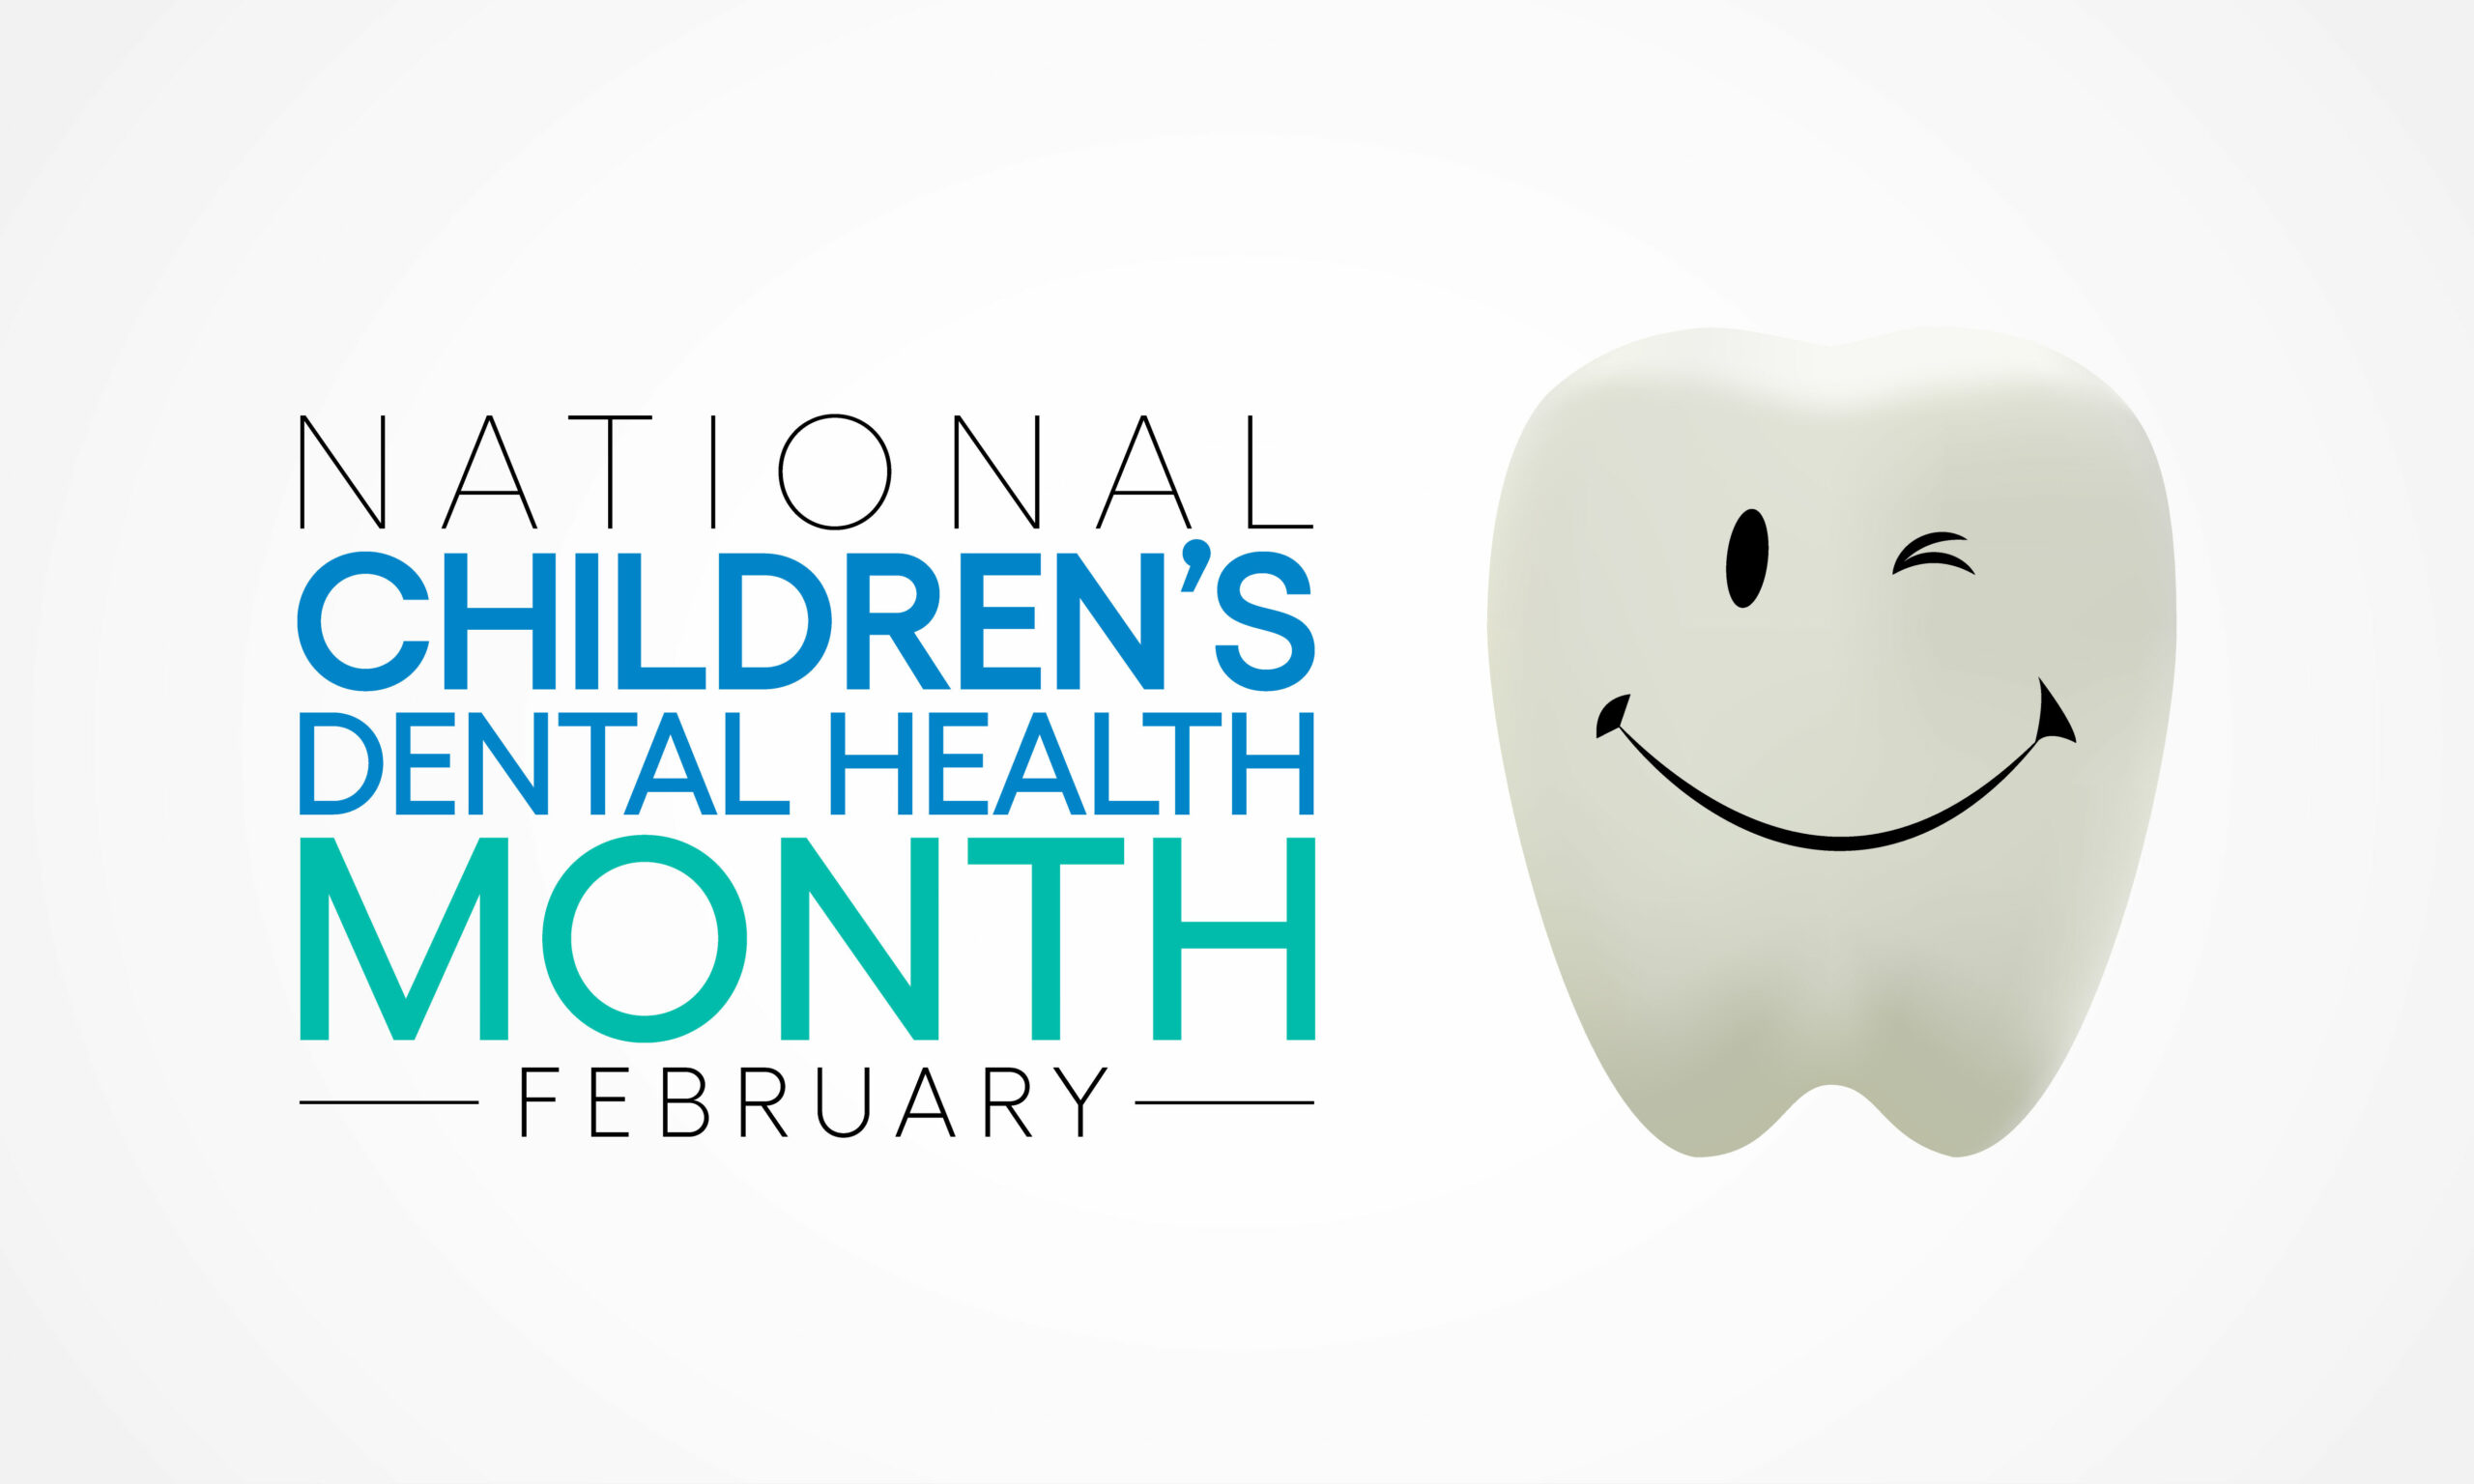 It’s Time to Celebrate National Children’s Dental Health Month